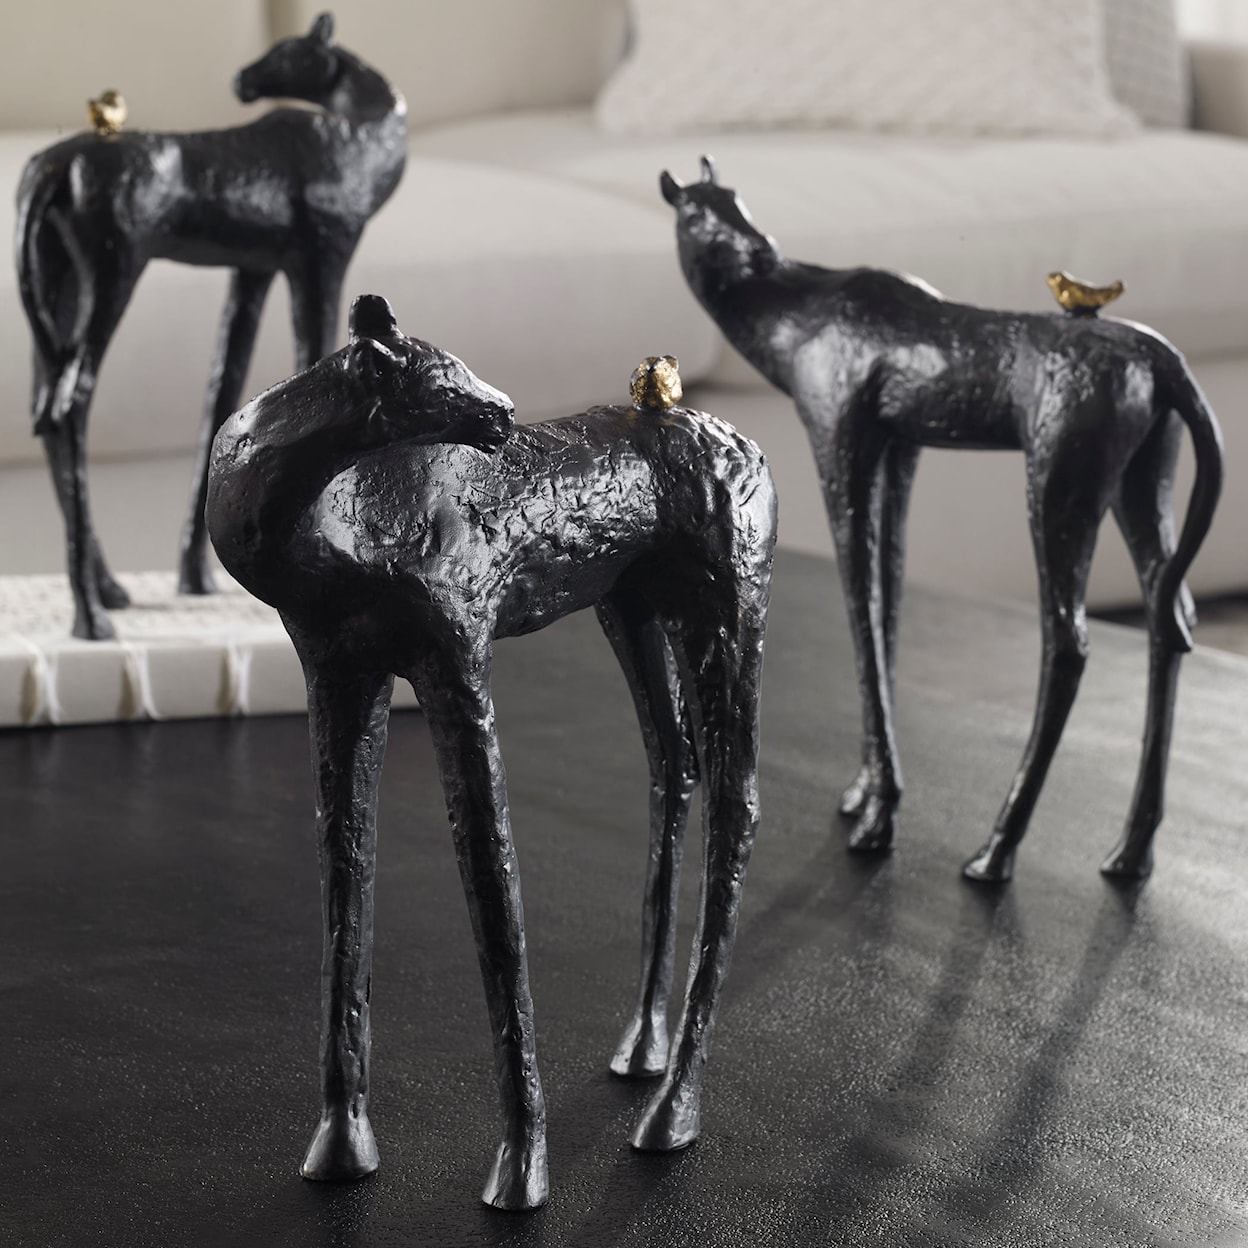 Uttermost Accessories - Statues and Figurines Hello Friend Sculpture